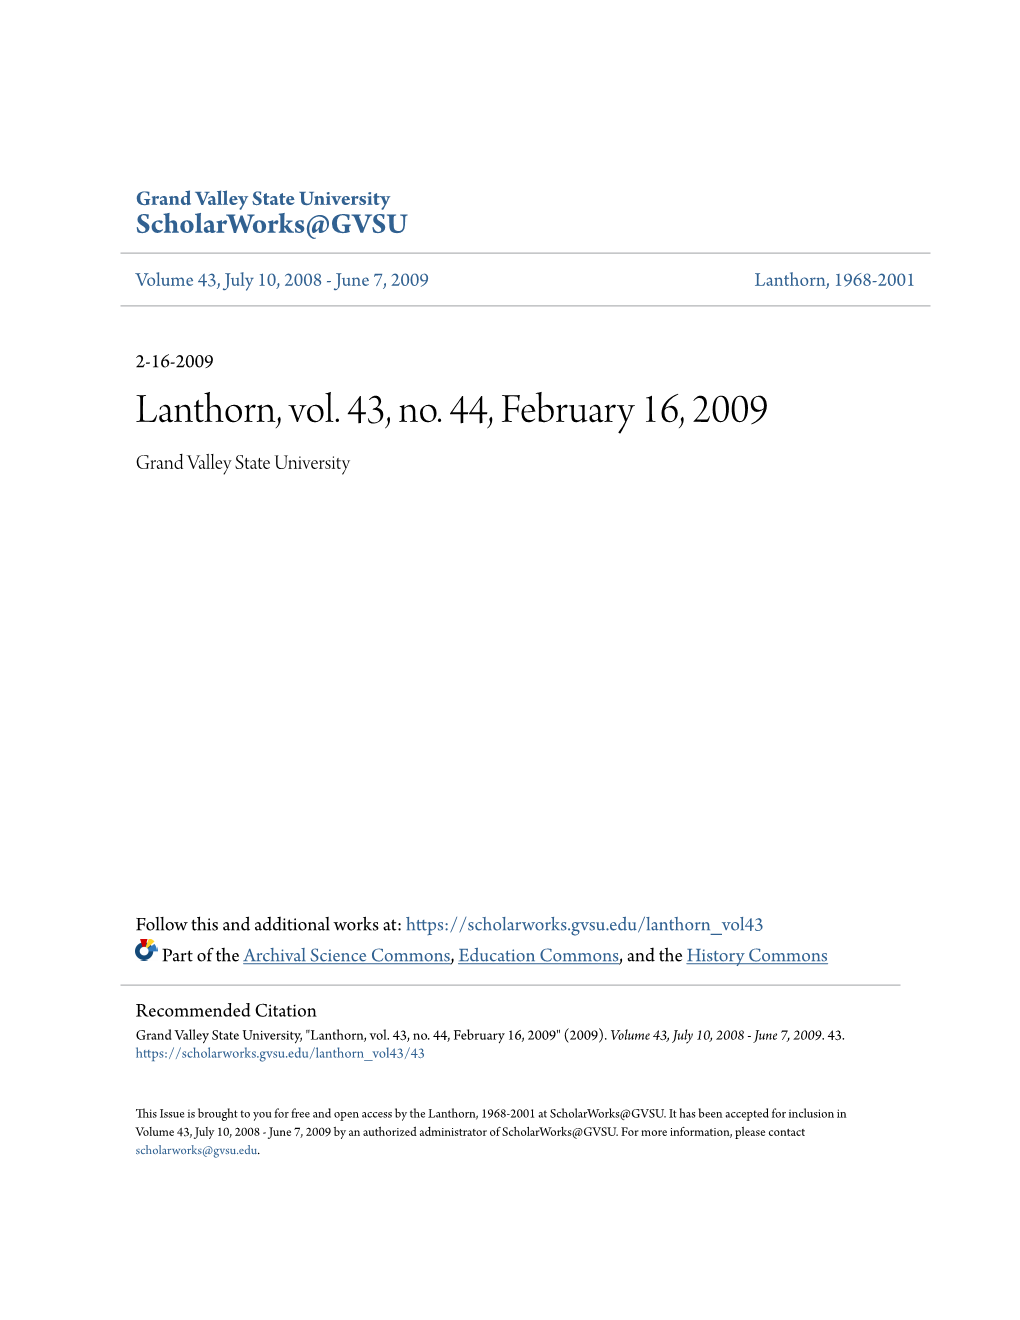 Lanthorn, Vol. 43, No. 44, February 16, 2009 Grand Valley State University